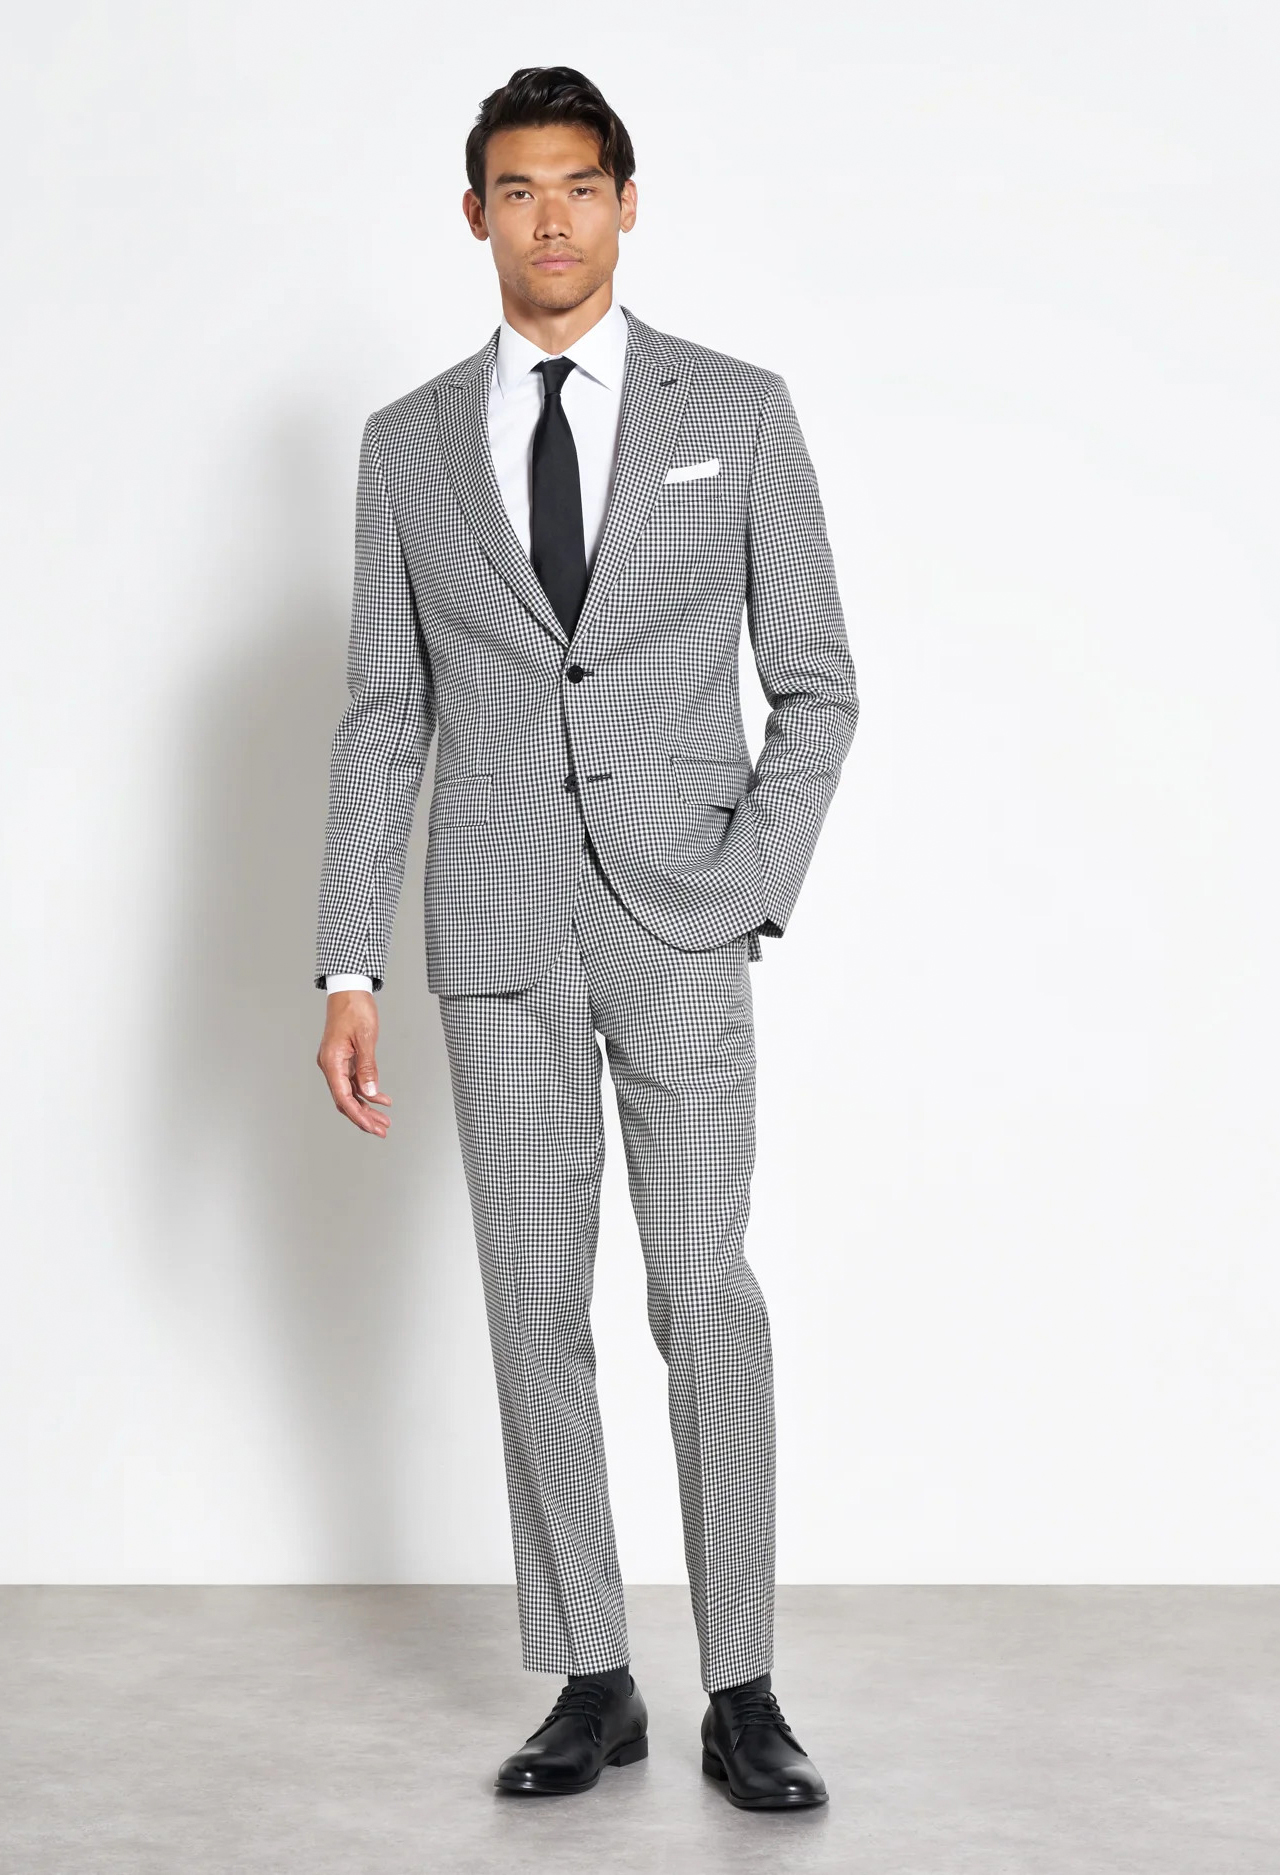 grey gingham plaid suit with white shirt and black tie